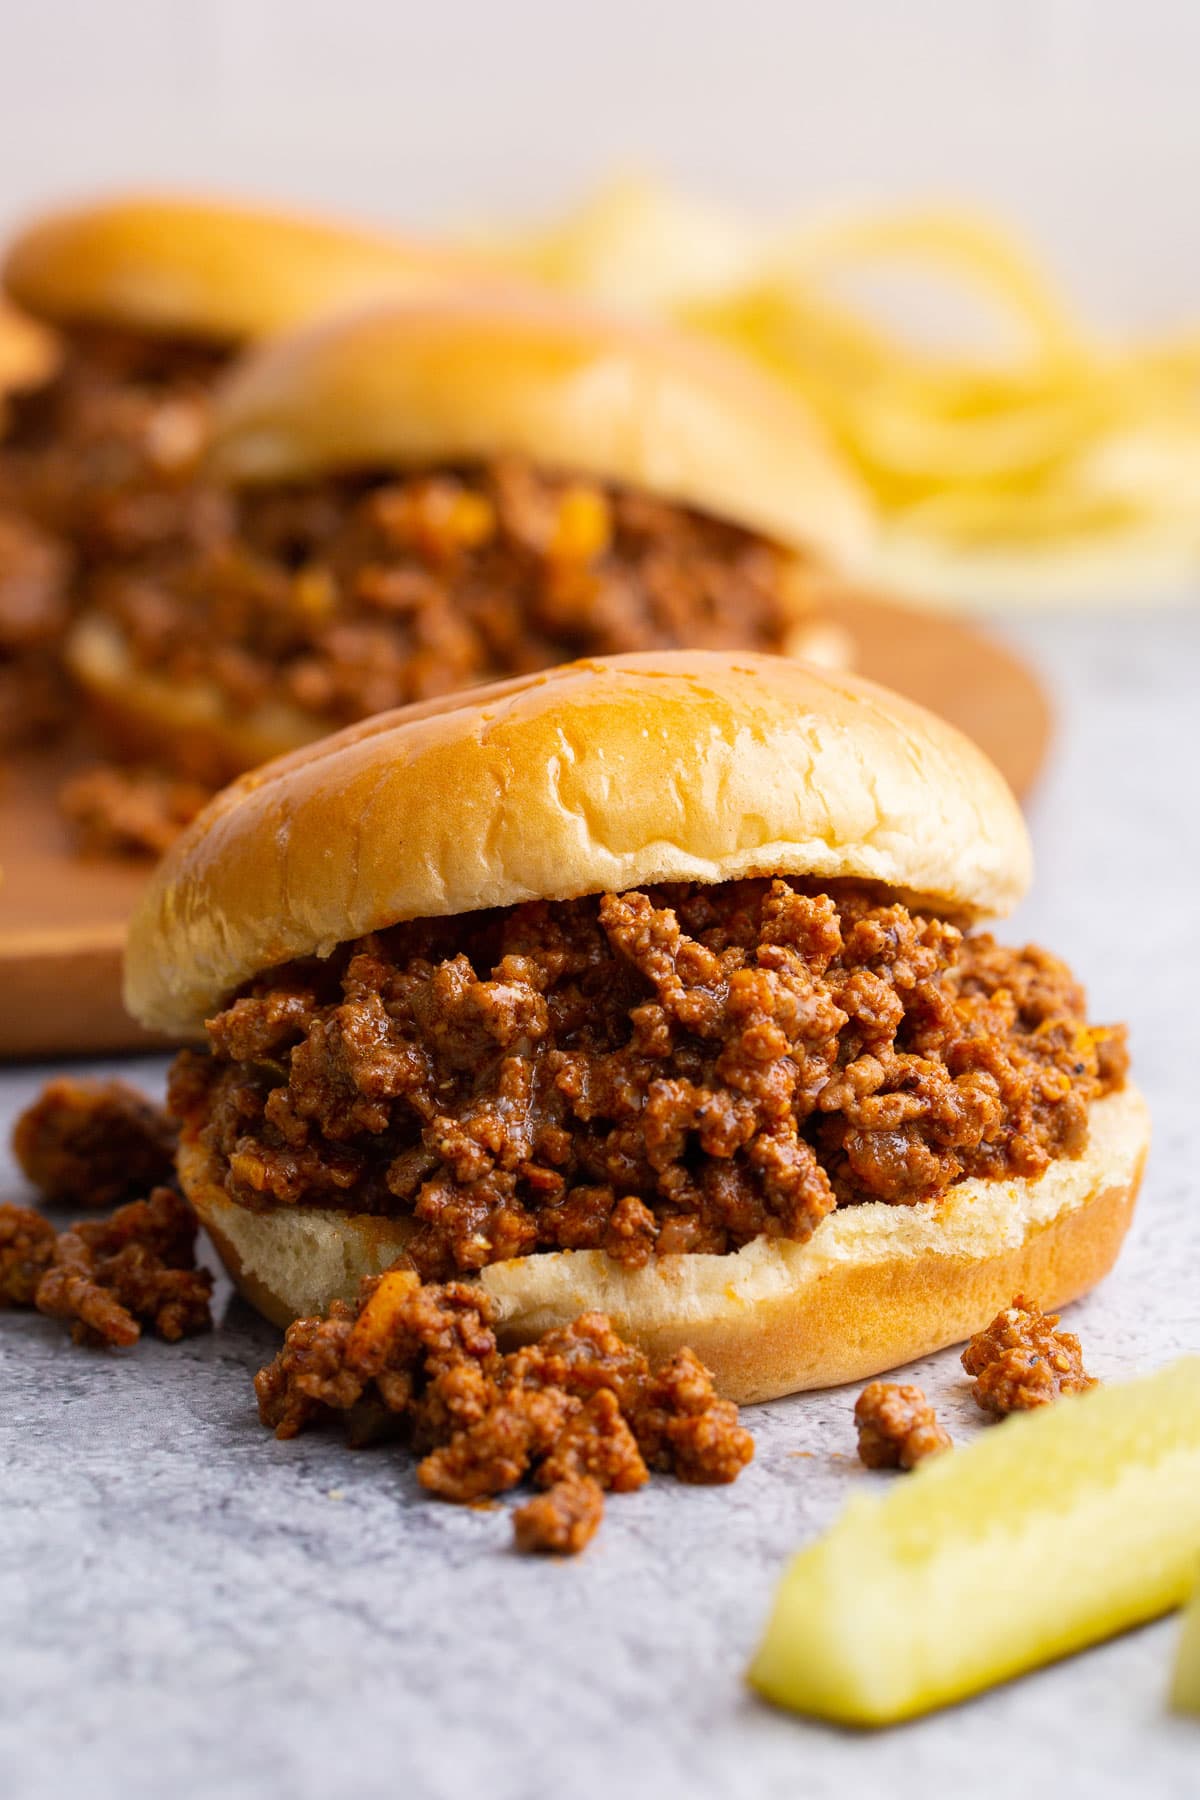 Several homemade Sloppy Joes sandwiches with pickle spears and potato chips.